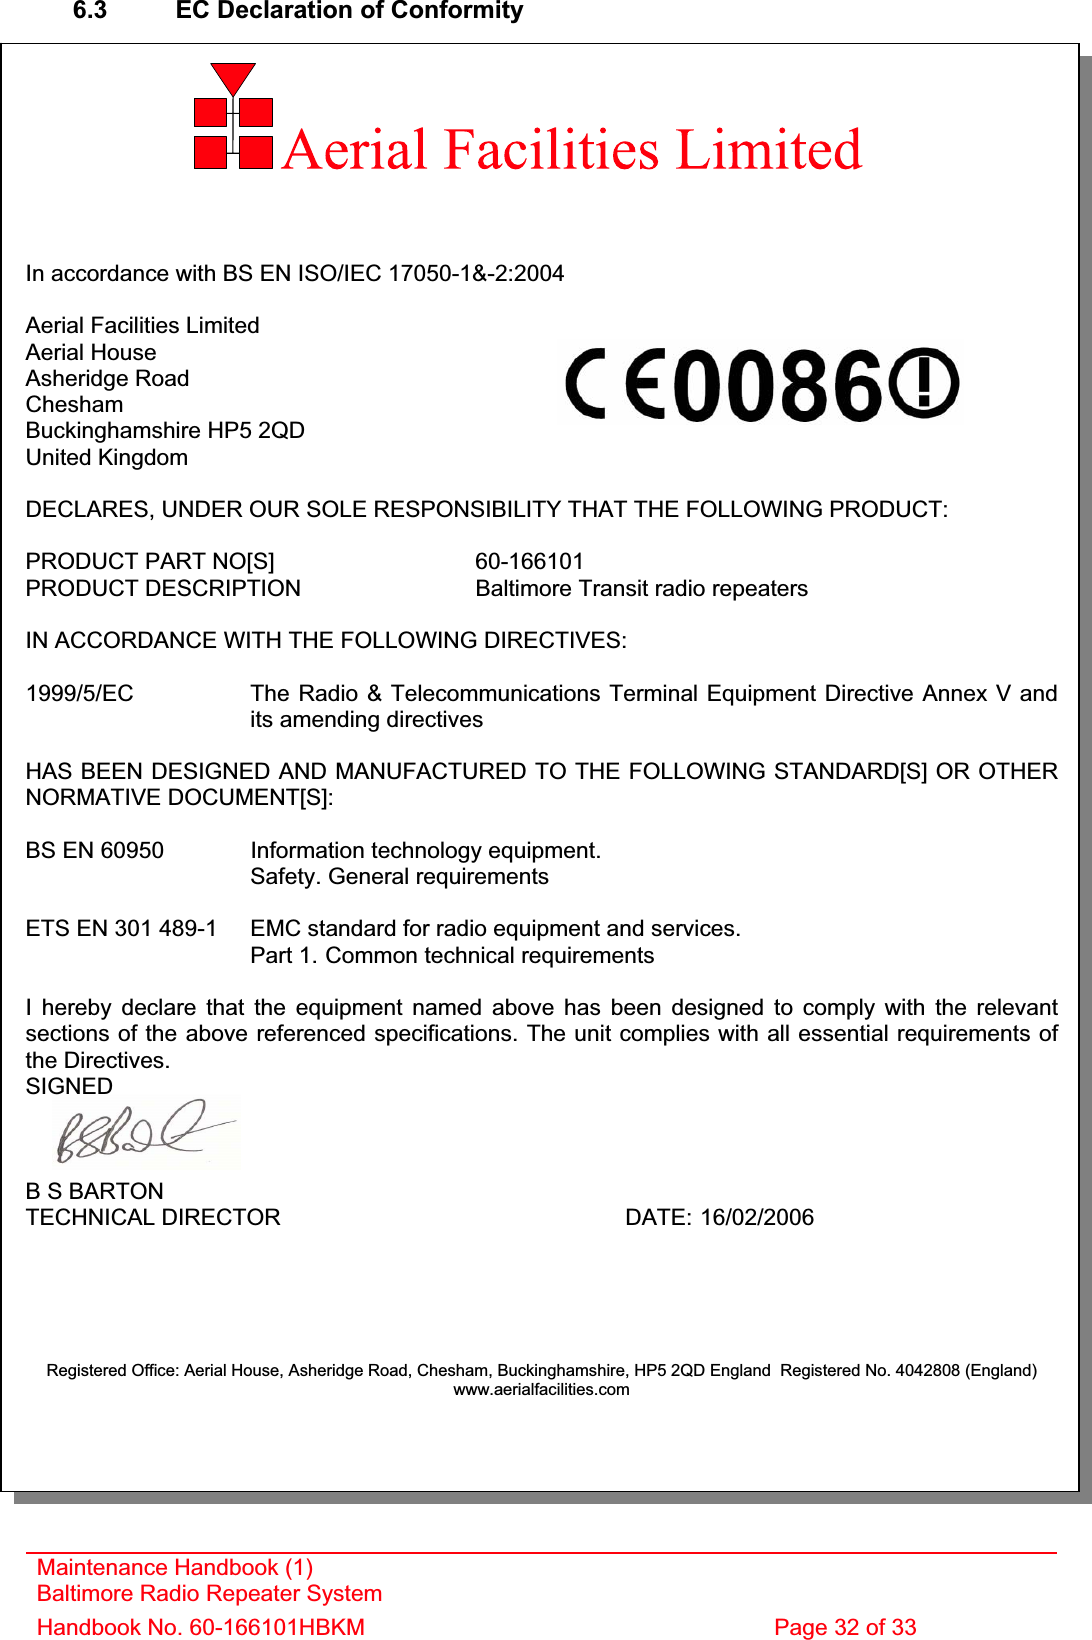 6.3  EC Declaration of Conformity In accordance with BS EN ISO/IEC 17050-1&amp;-2:2004 Aerial Facilities Limited Aerial House Asheridge Road CheshamBuckinghamshire HP5 2QD United Kingdom DECLARES, UNDER OUR SOLE RESPONSIBILITY THAT THE FOLLOWING PRODUCT: PRODUCT PART NO[S]  60-166101PRODUCT DESCRIPTION  Baltimore Transit radio repeaters IN ACCORDANCE WITH THE FOLLOWING DIRECTIVES: 1999/5/EC The Radio &amp; Telecommunications Terminal Equipment Directive Annex V and    its amending directivesHAS BEEN DESIGNED AND MANUFACTURED TO THE FOLLOWING STANDARD[S] OR OTHERNORMATIVE DOCUMENT[S]: BS EN 60950 Information technology equipment.   Safety. General requirementsETS EN 301 489-1  EMC standard for radio equipment and services.Part 1. Common technical requirements I hereby declare that the equipment named above has been designed to comply with the relevant sections of the above referenced specifications. The unit complies with all essential requirements of the Directives. SIGNEDB S BARTON TECHNICAL DIRECTOR     DATE: 16/02/2006Registered Office: Aerial House, Asheridge Road, Chesham, Buckinghamshire, HP5 2QD England  Registered No. 4042808 (England) www.aerialfacilities.comMaintenance Handbook (1) Baltimore Radio Repeater System Handbook No. 60-166101HBKM  Page 32 of 33 